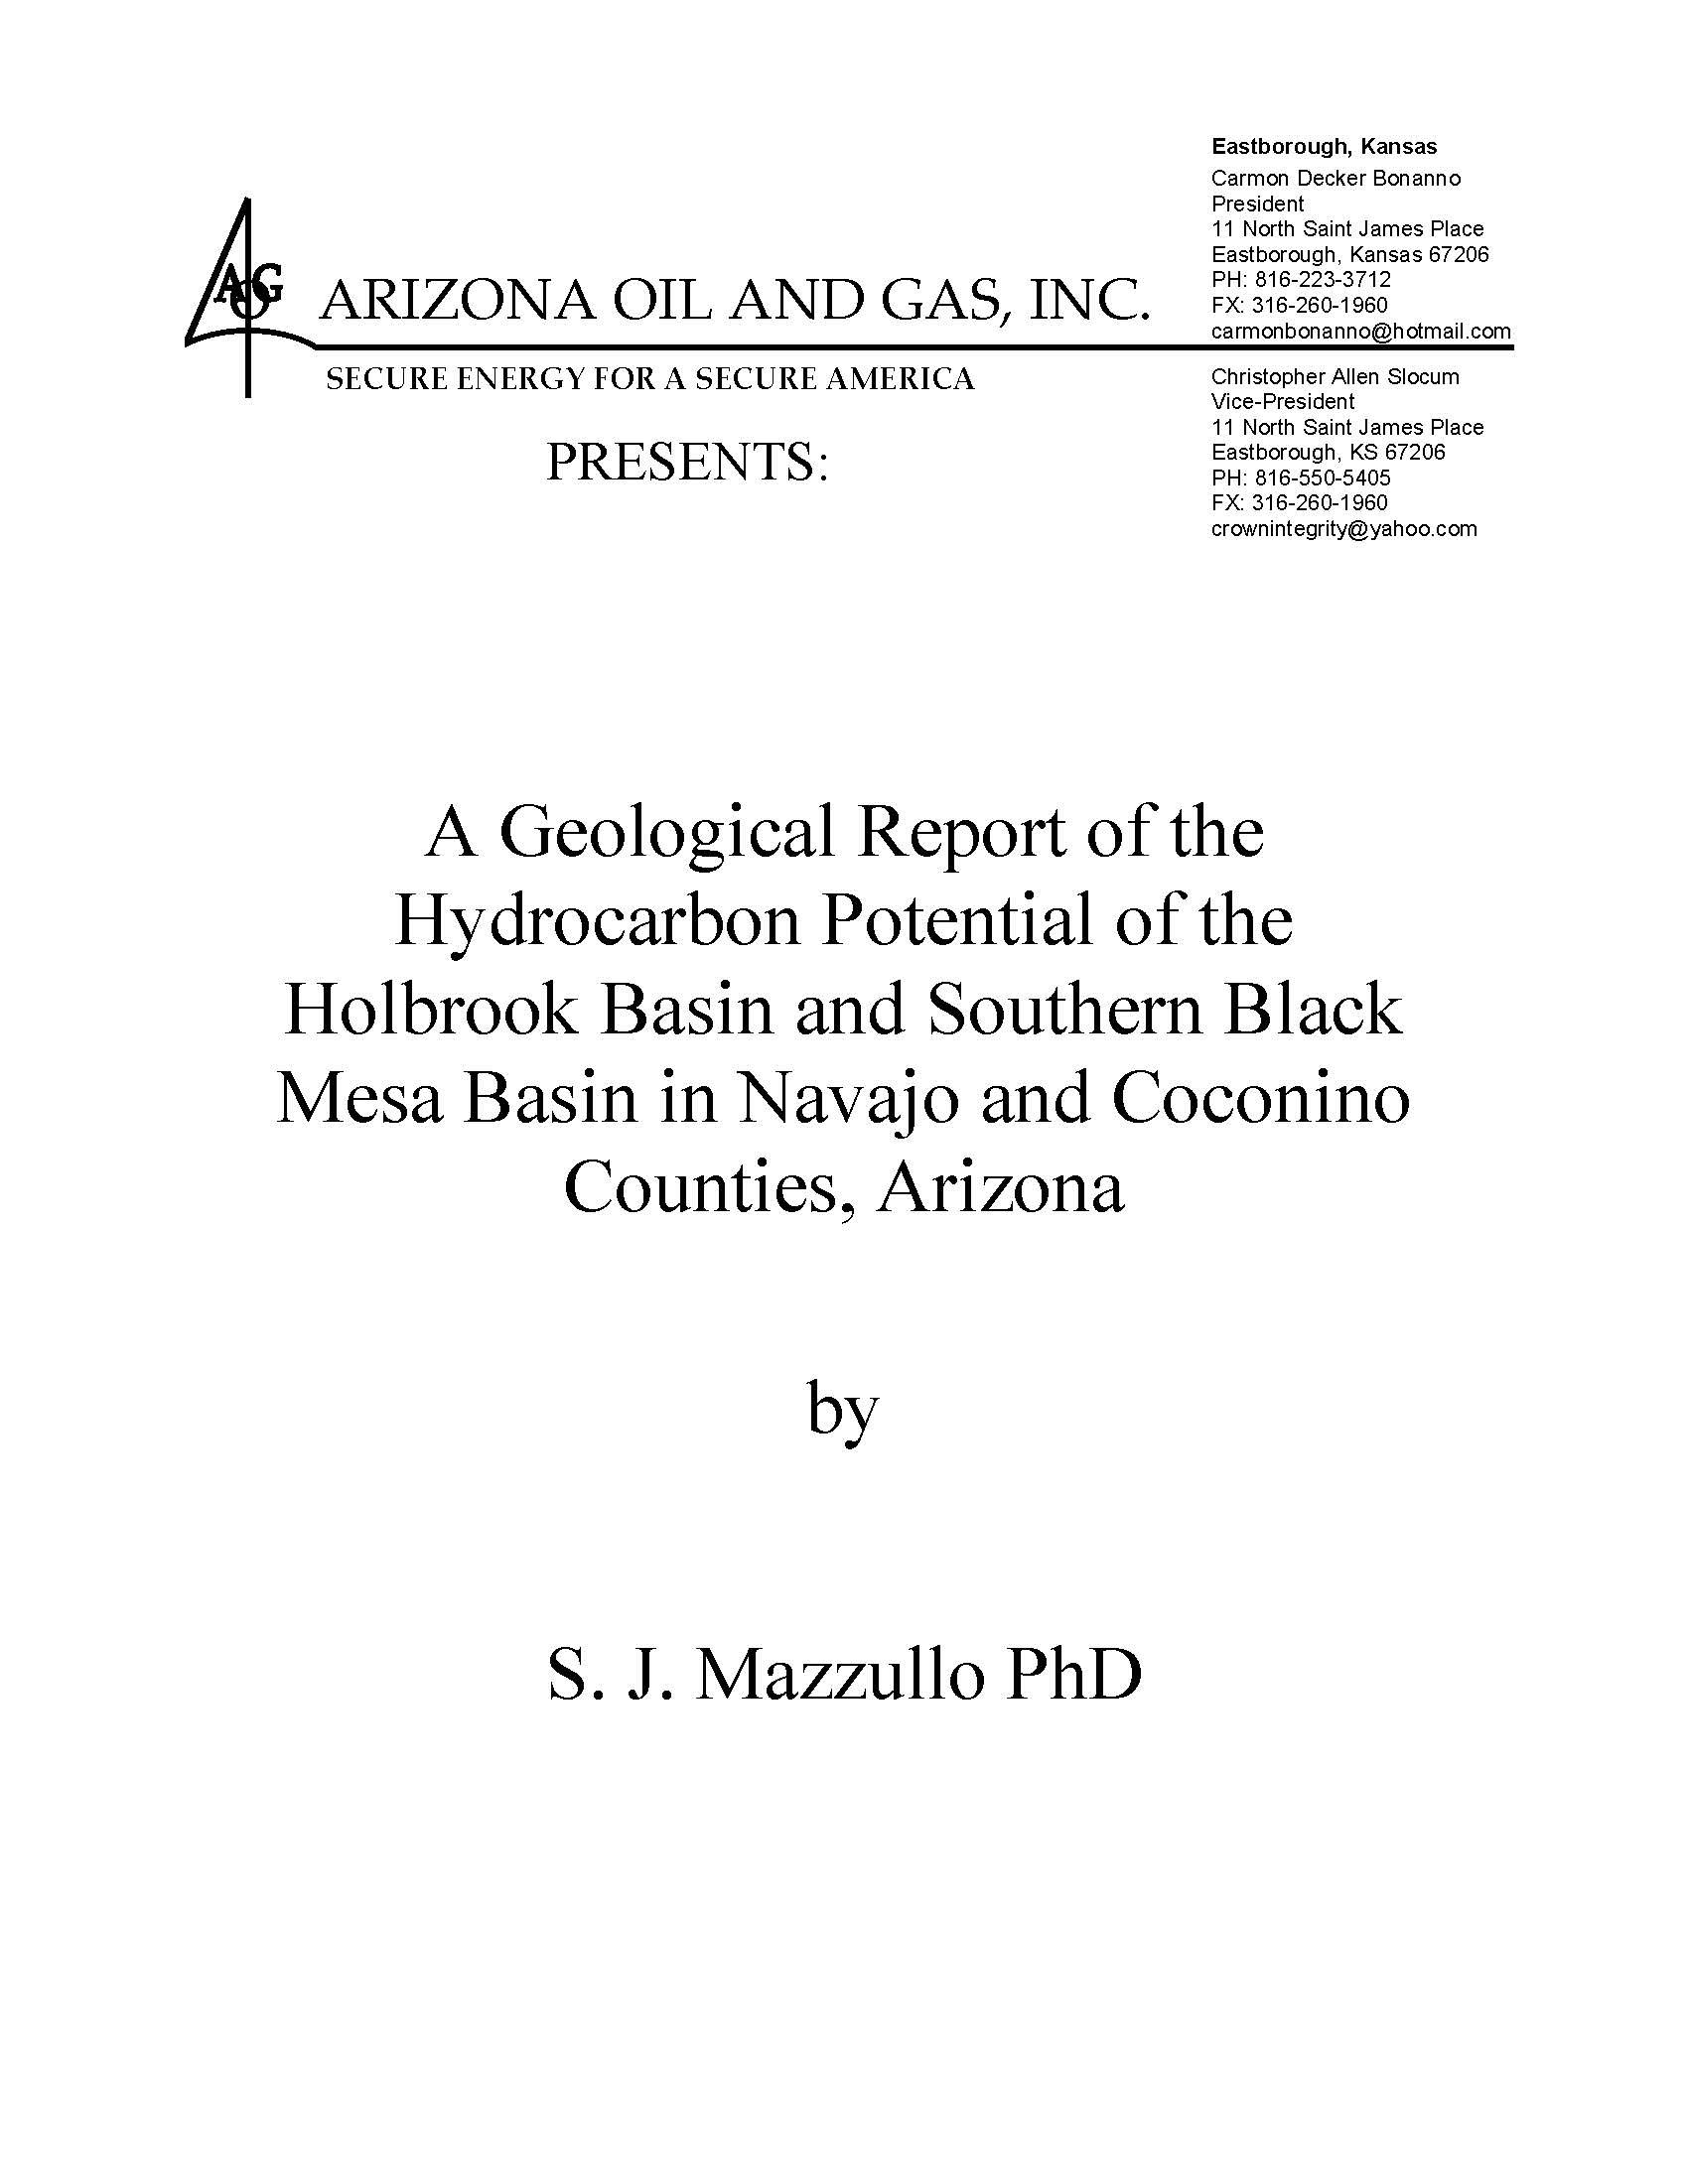 Holbrook Basin Petroleum Potential by S J Mazzullo1